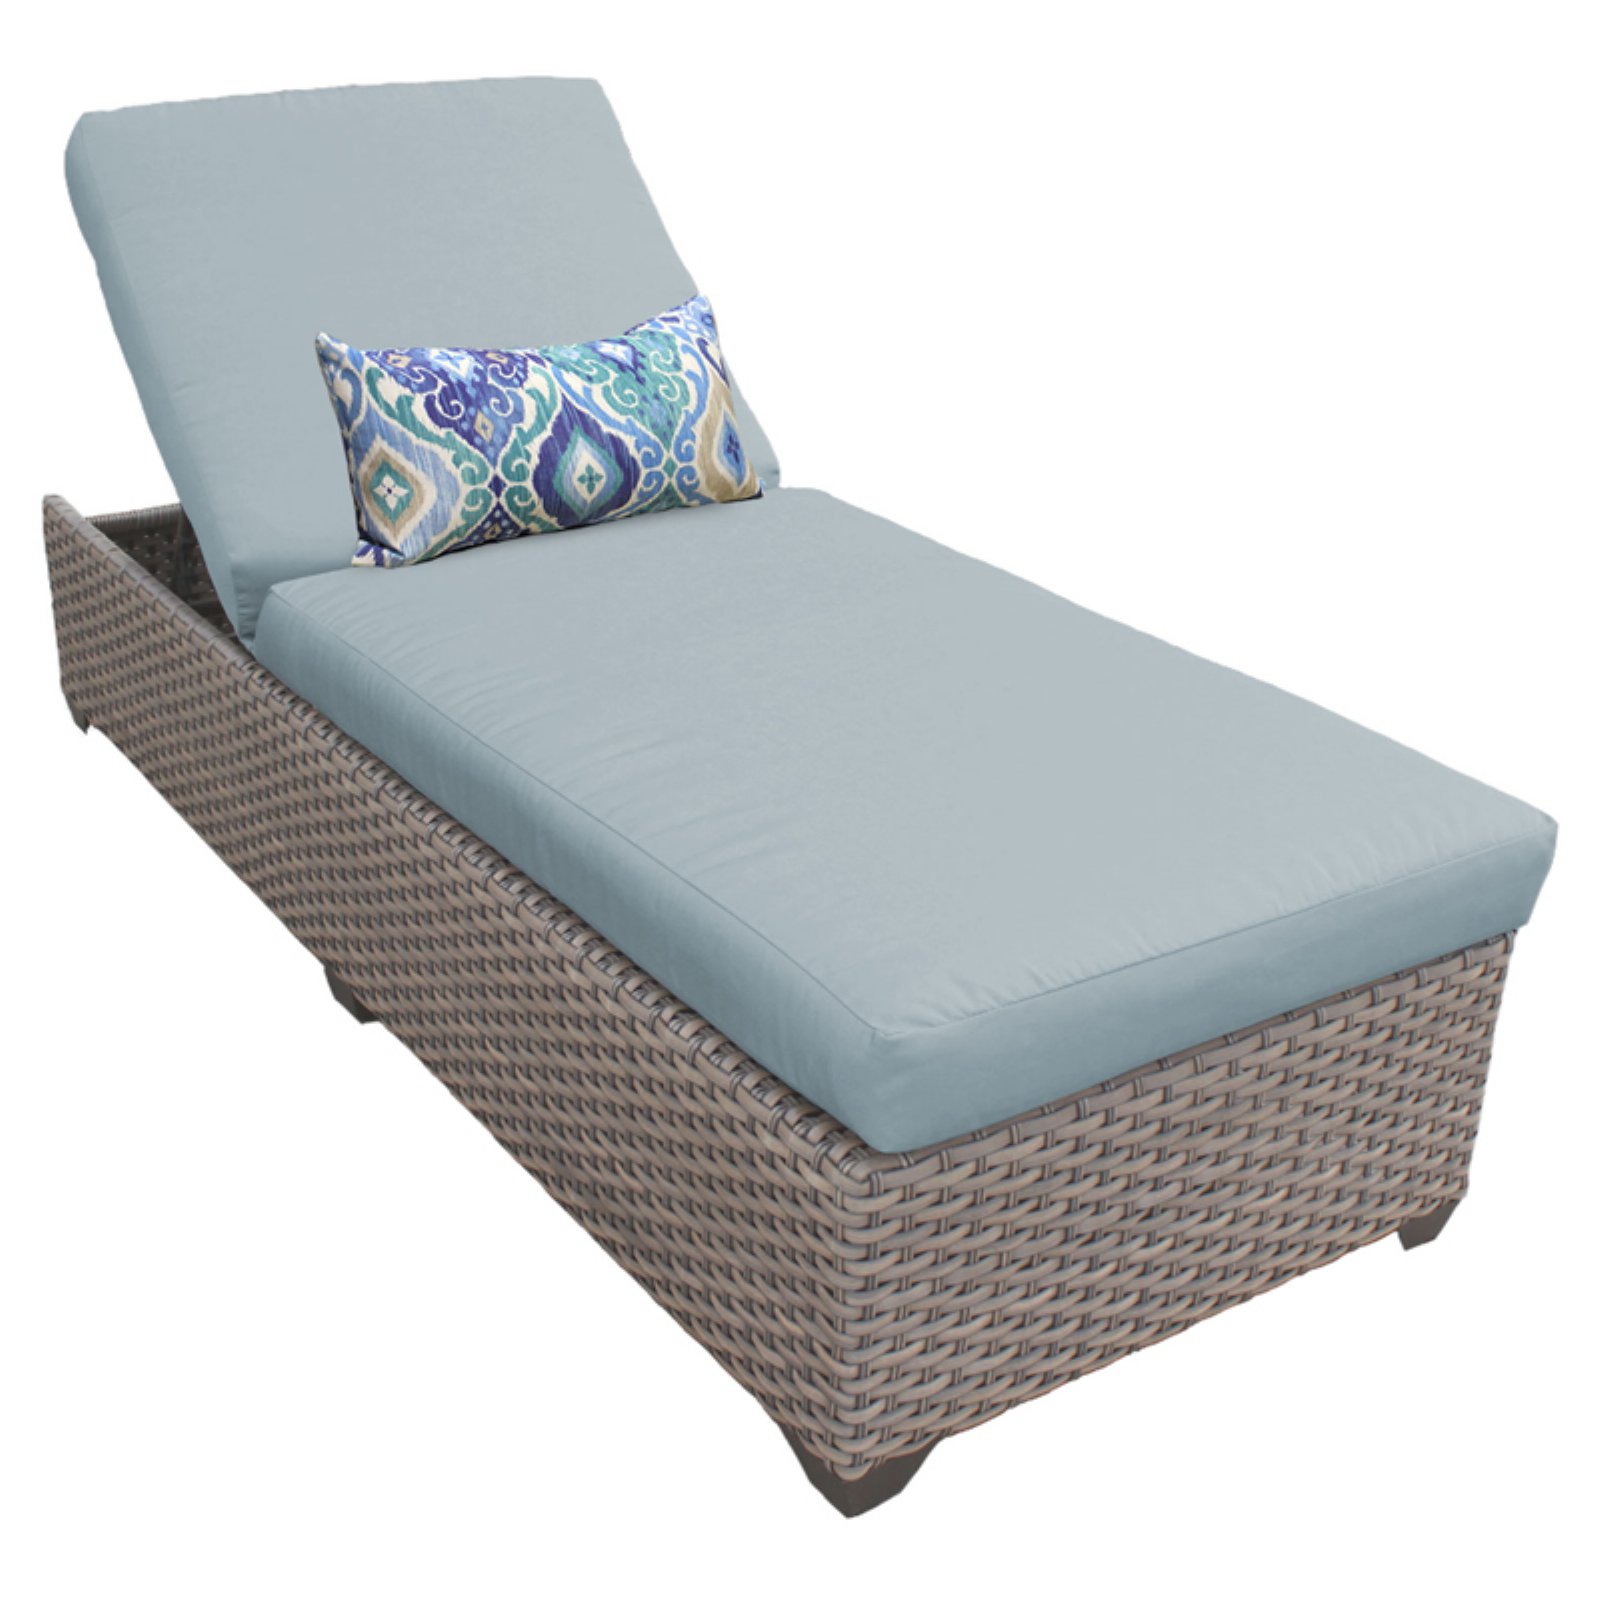 Monterey Patio Furniture Wicker Chaise Lounge - image 2 of 7